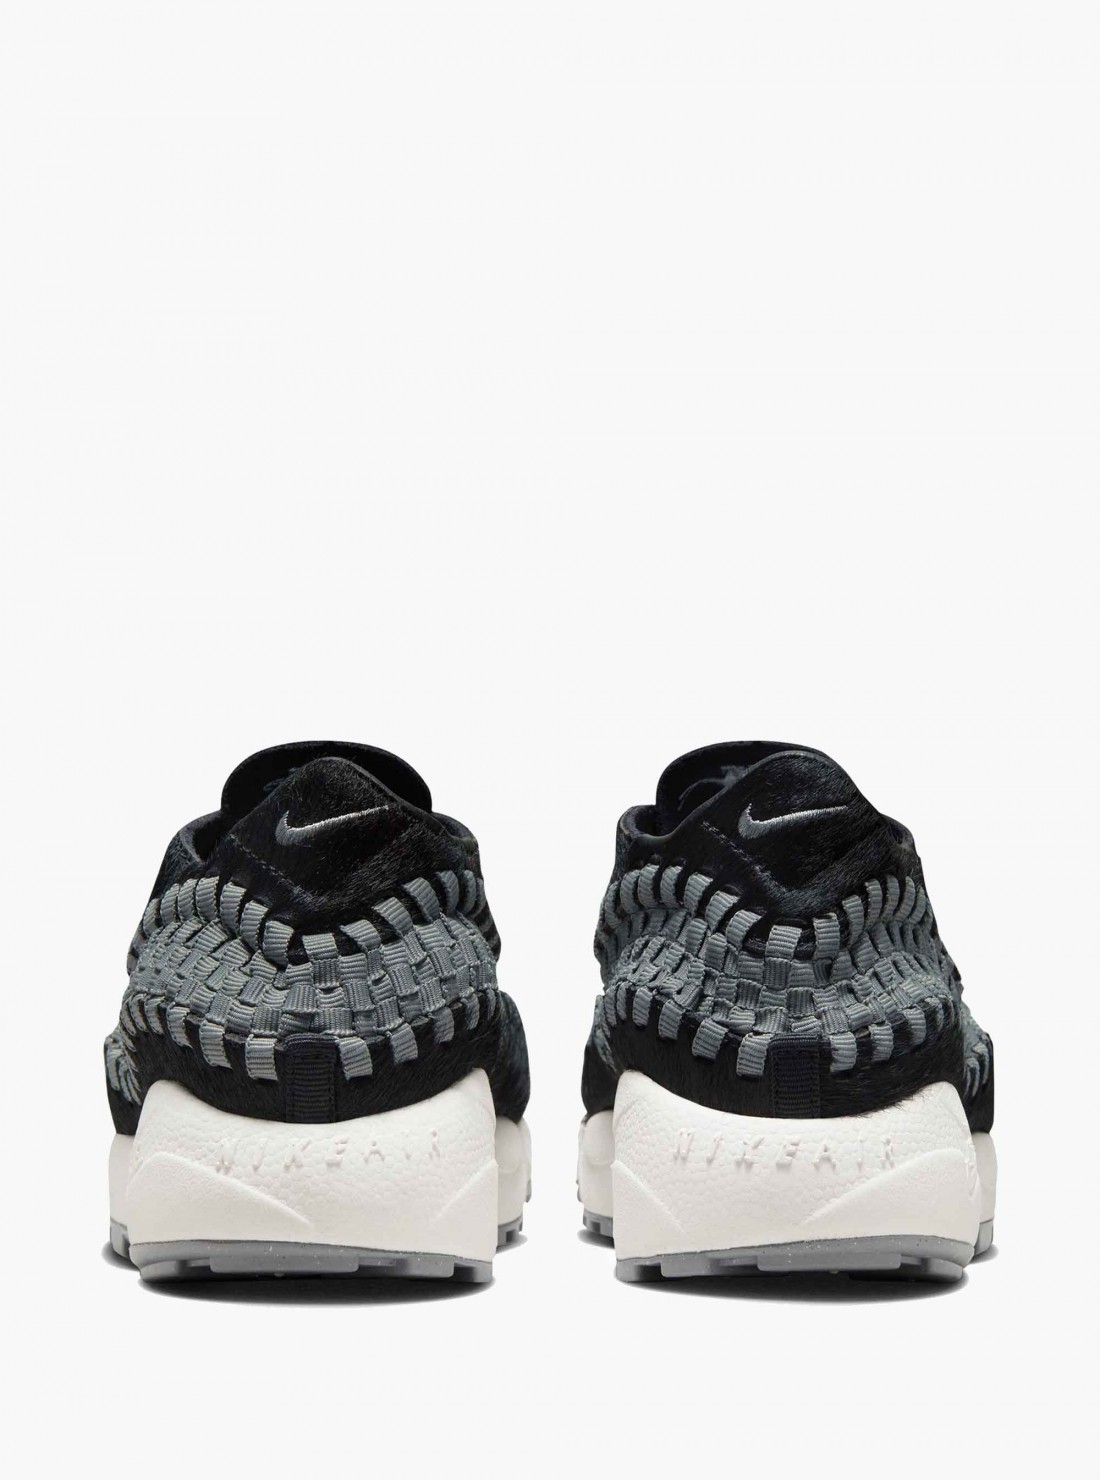 W Air Footscape Woven